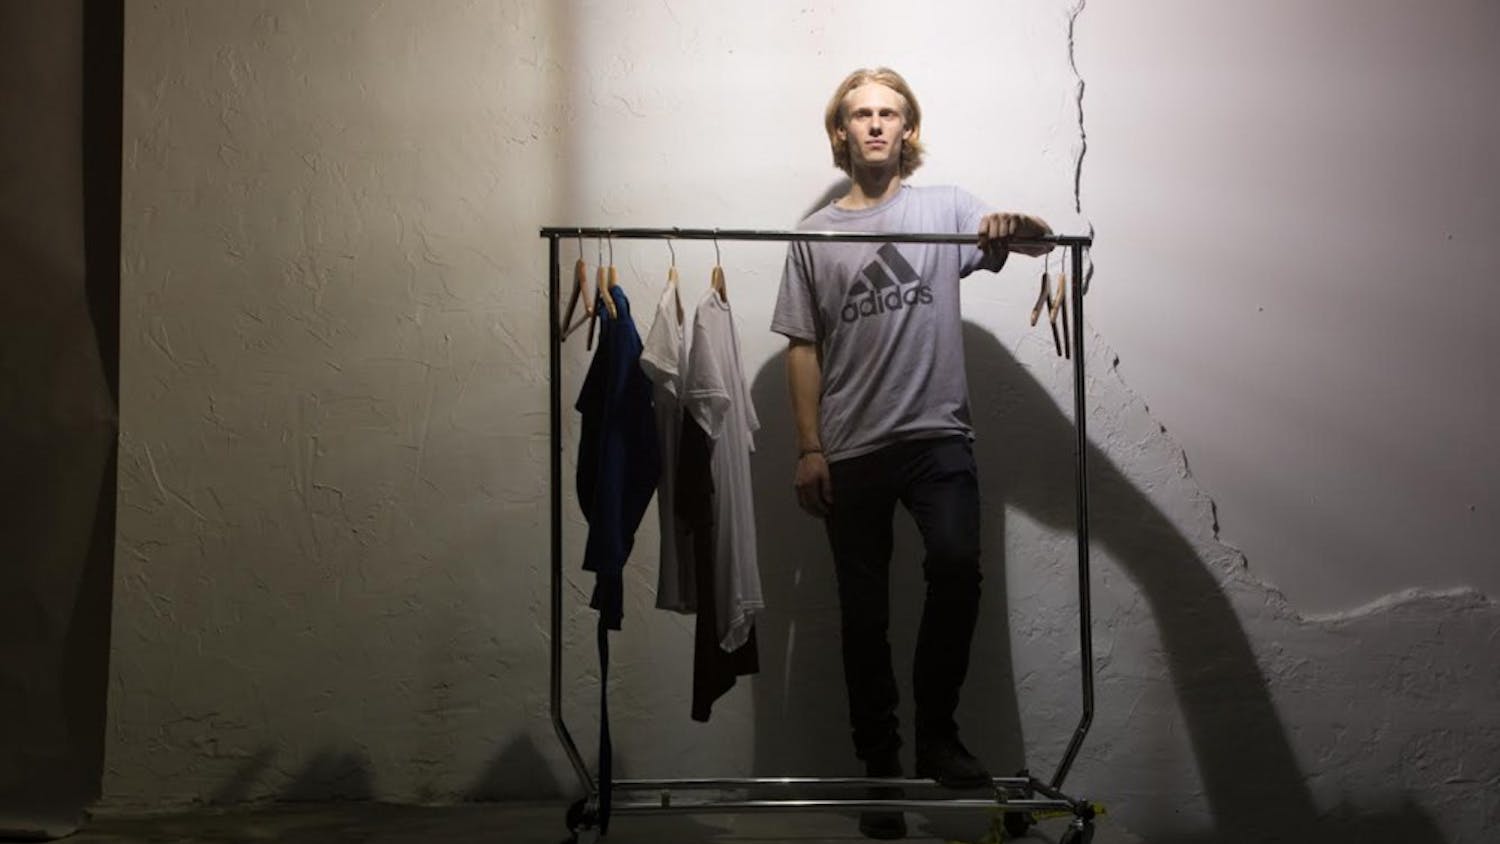 James Creissen, a sophomore business major, poses in front of a rack of clothes he designed. Creissen held a fashion show on East Rosemary Street Thursday night.